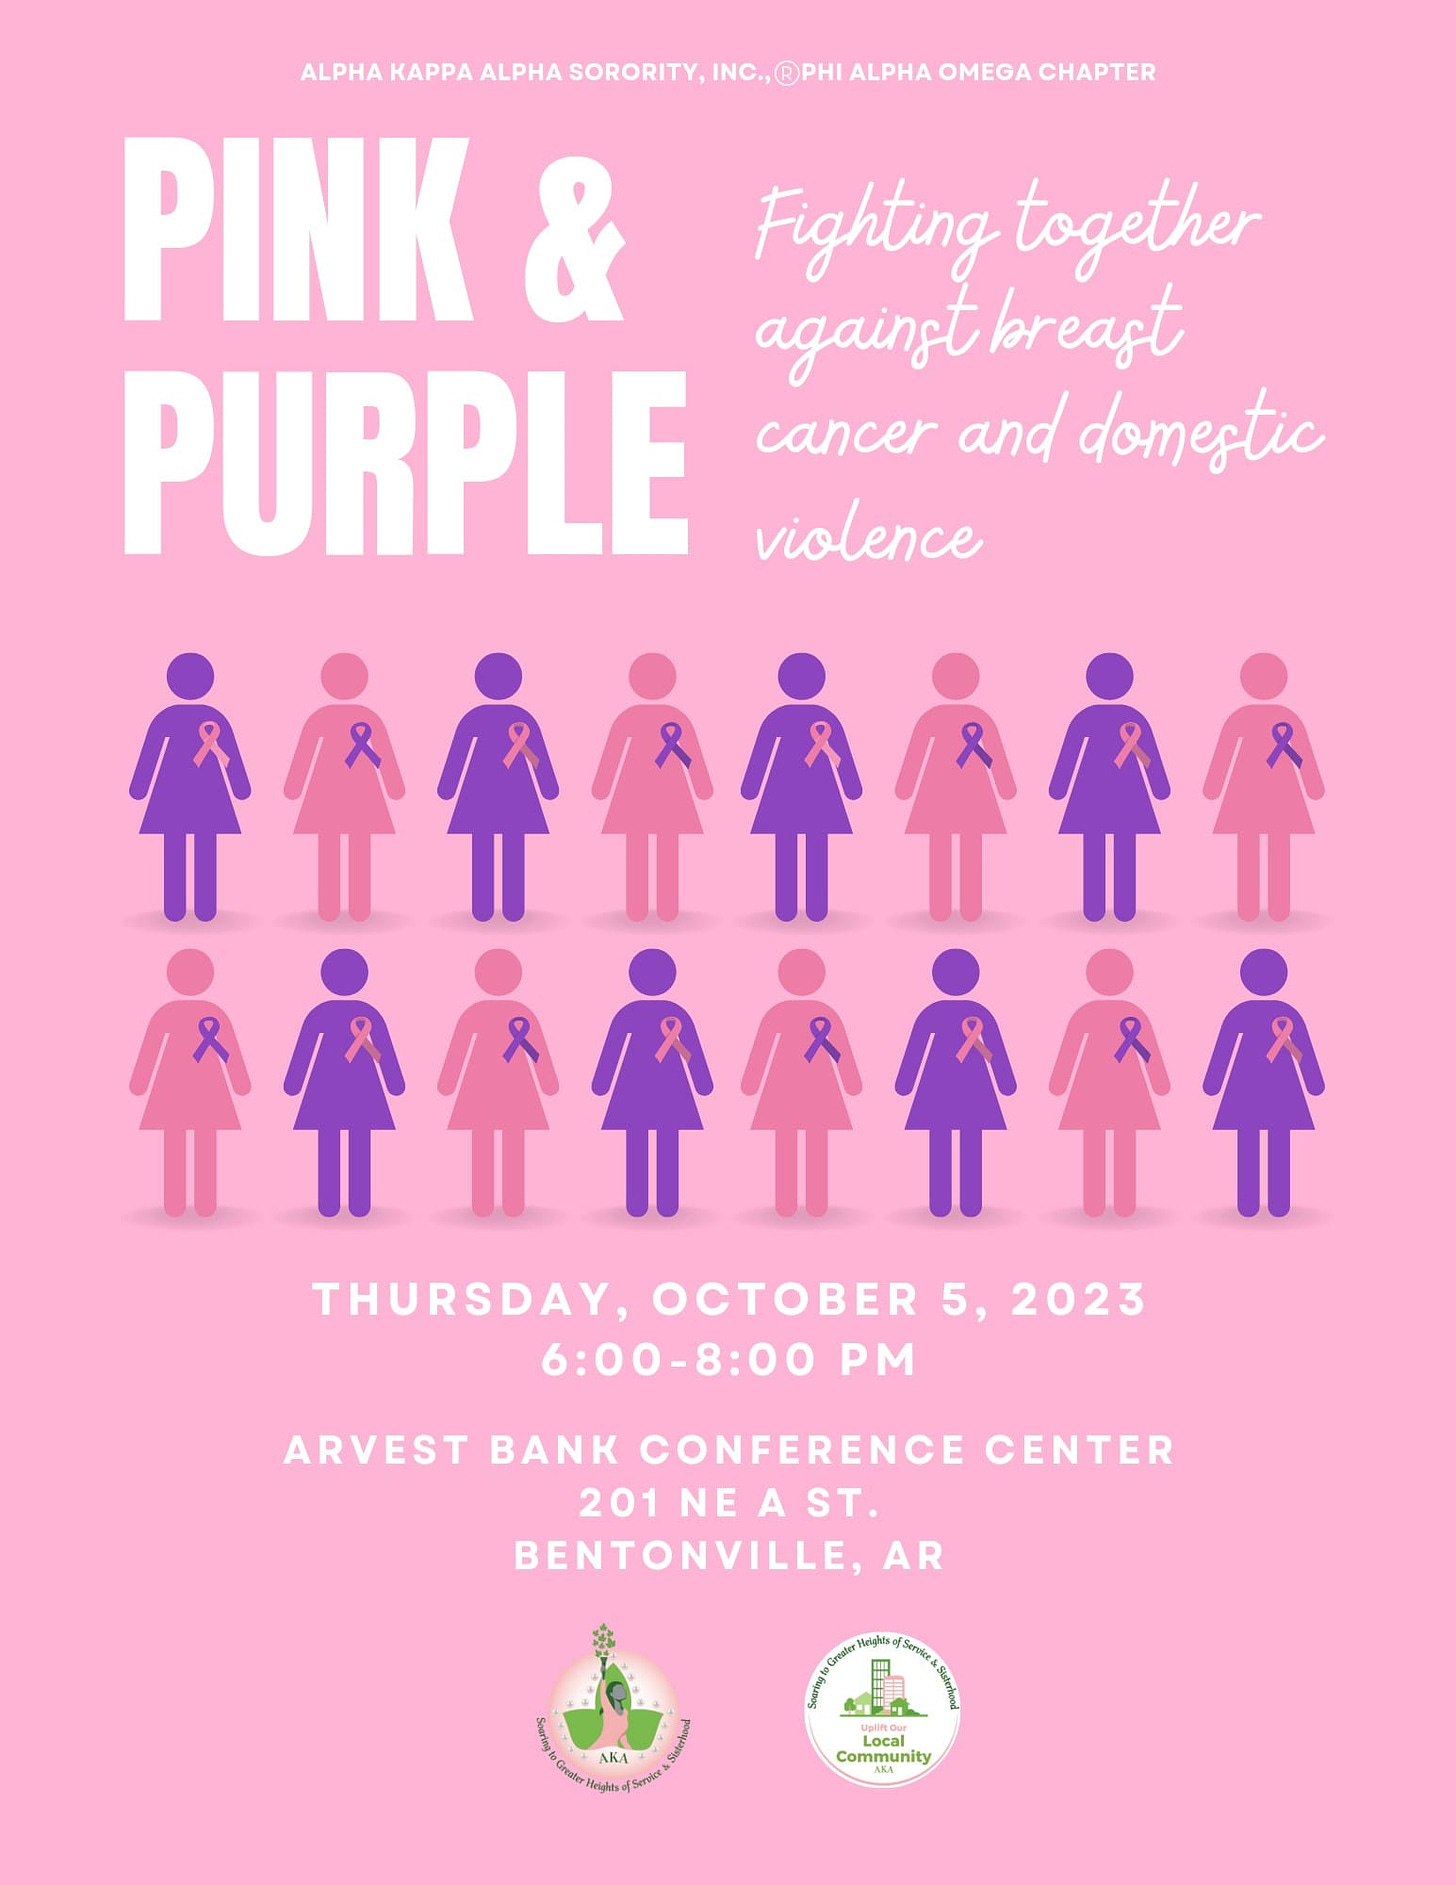 May be a graphic of text that says 'ALPHA KAPPA ALPHA SORORITY, INC.,®PHI ALPHA OMEGA CHAPTER PINK & Fighting together against breast PURPLE cancer and domestic violence THURSDAY, OCTOBER 5, 2023 6:00-8:00 PM ARVEST BANK CONFERENCE CENTER 201NEAST. BENTONVILLE, AR .Se Upllit.Our Community'